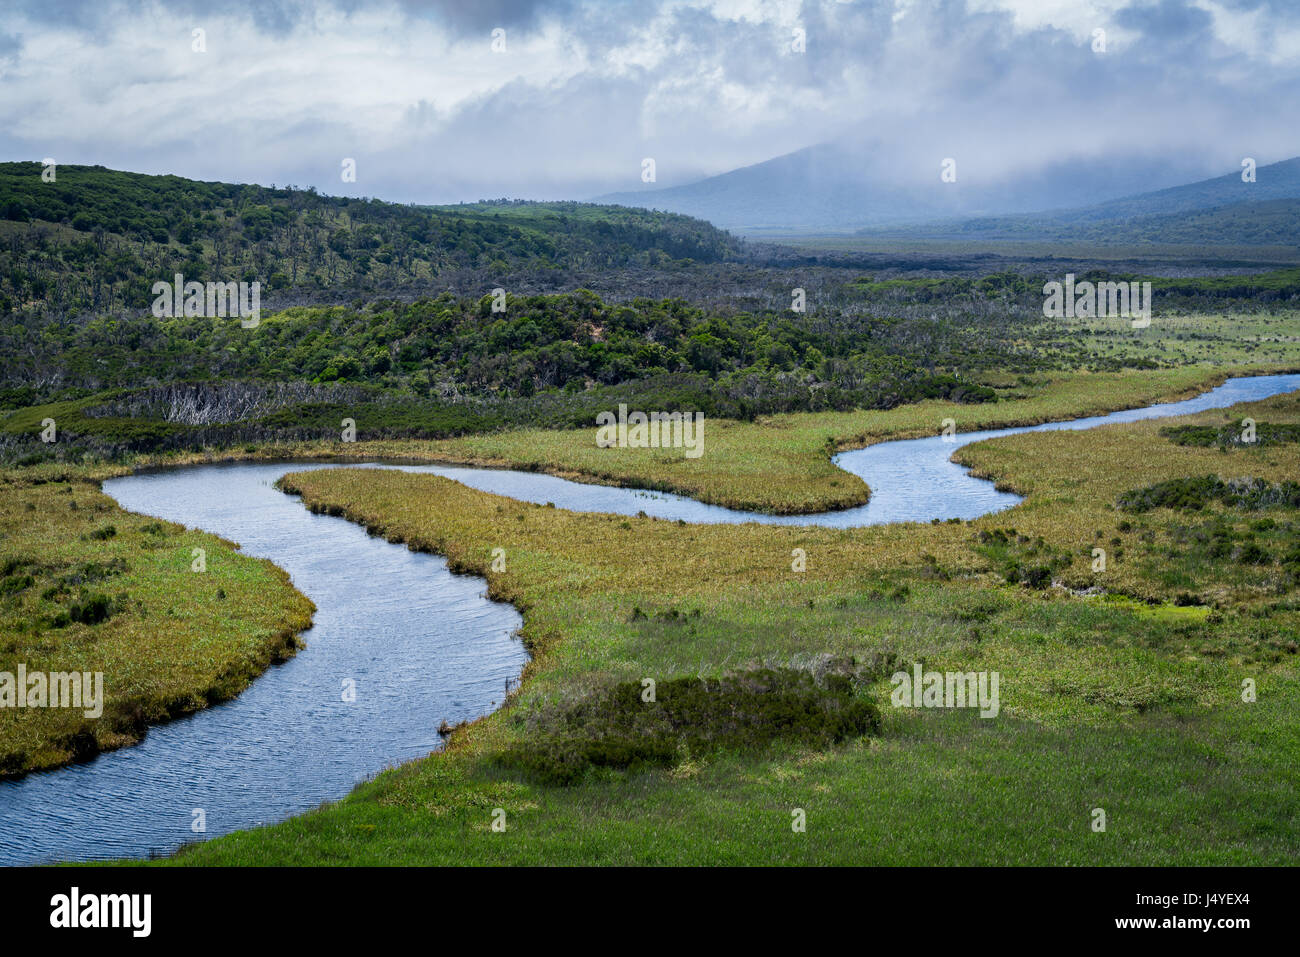 A river serpentines through a plain, with mountains in the background covered by clouds Stock Photo